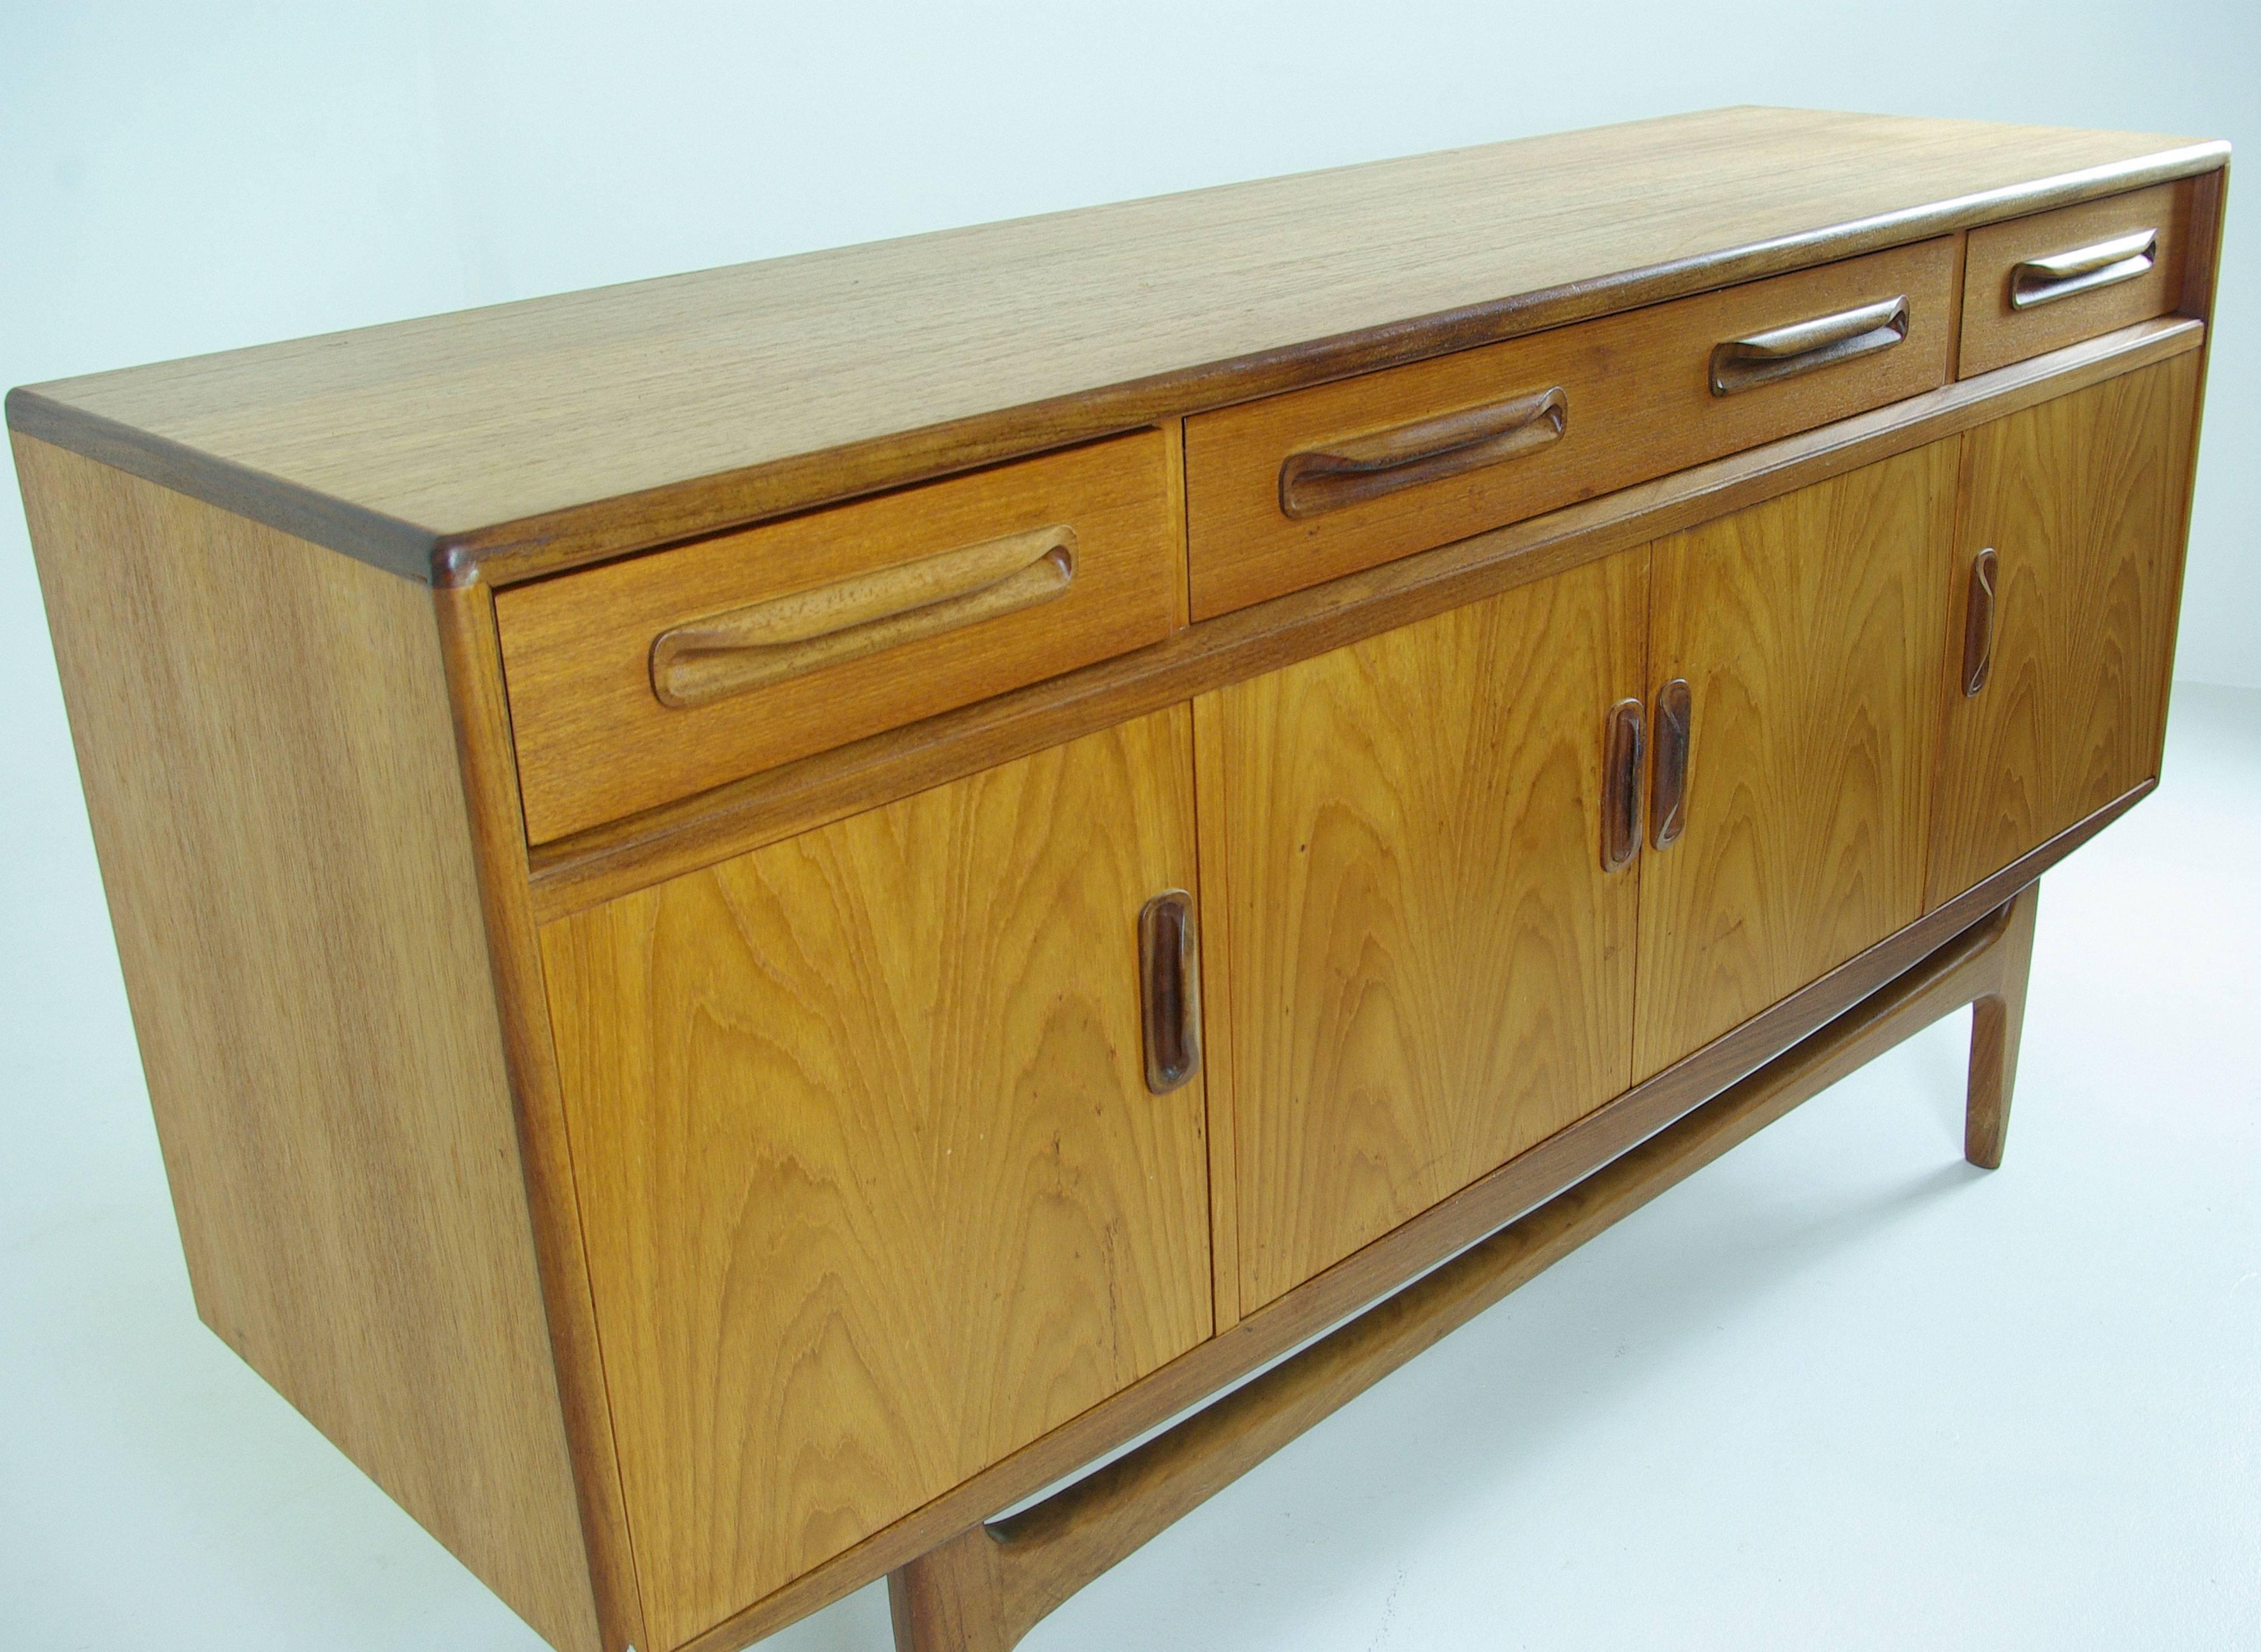 Scotland, 
1960.
Original finish.
Rectangular top.
Large central drawer flanked by two smaller drawers.
Nicely shaped handles.
Three cupboards below.

$1250.

B554
Measures: 60" W x 18" D x 33" H.
Shipping $475-500 with